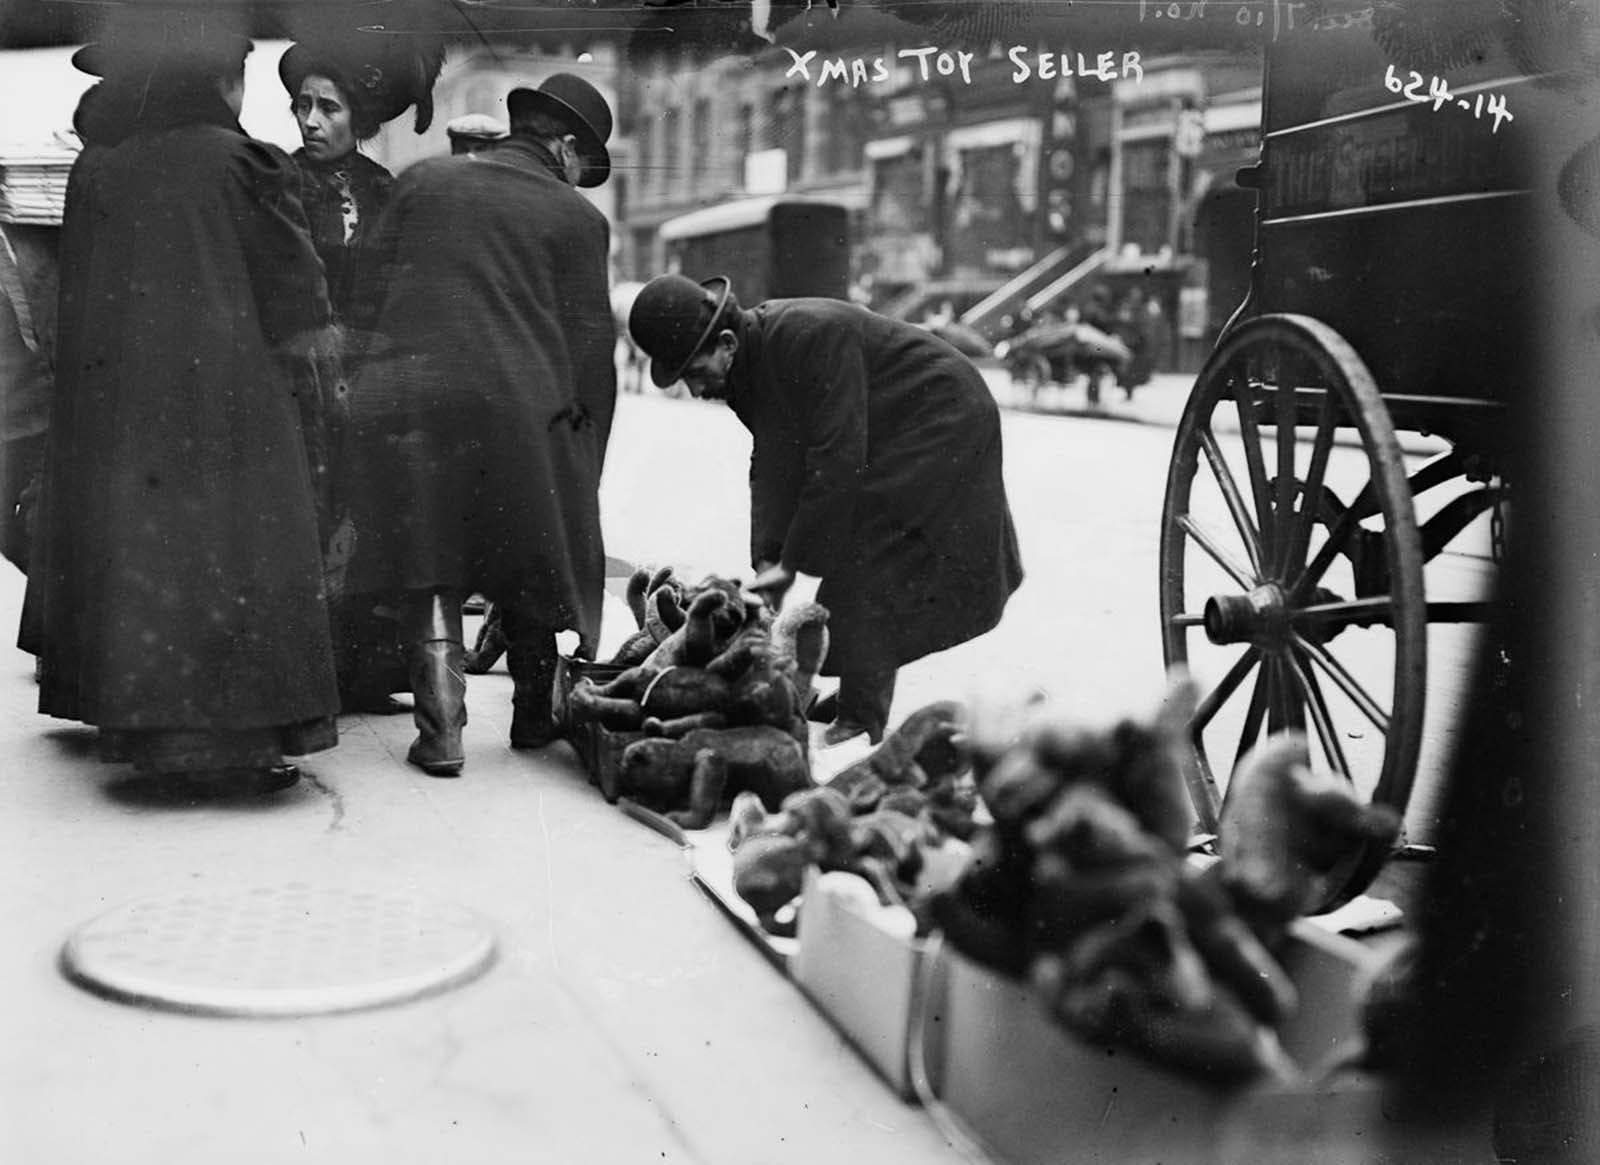 Fascinating Historical Photos of Holiday Shopping in New York City from the Early 20th Century